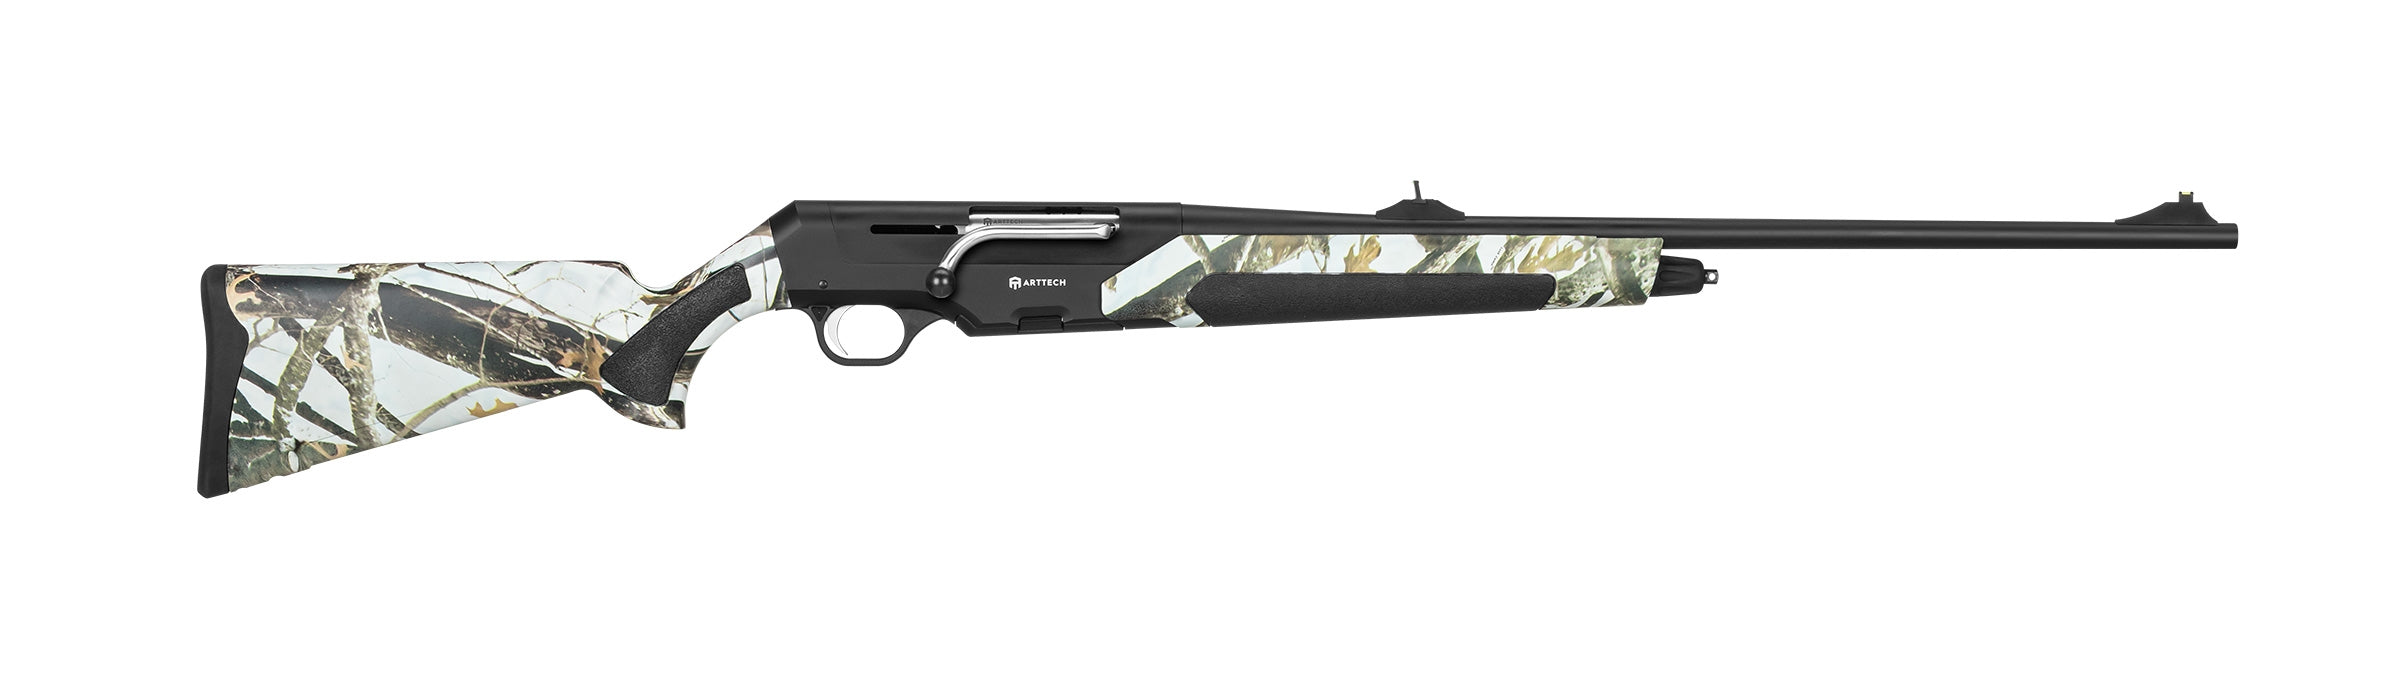 Prima SP Rectilinear Hunting Rifle